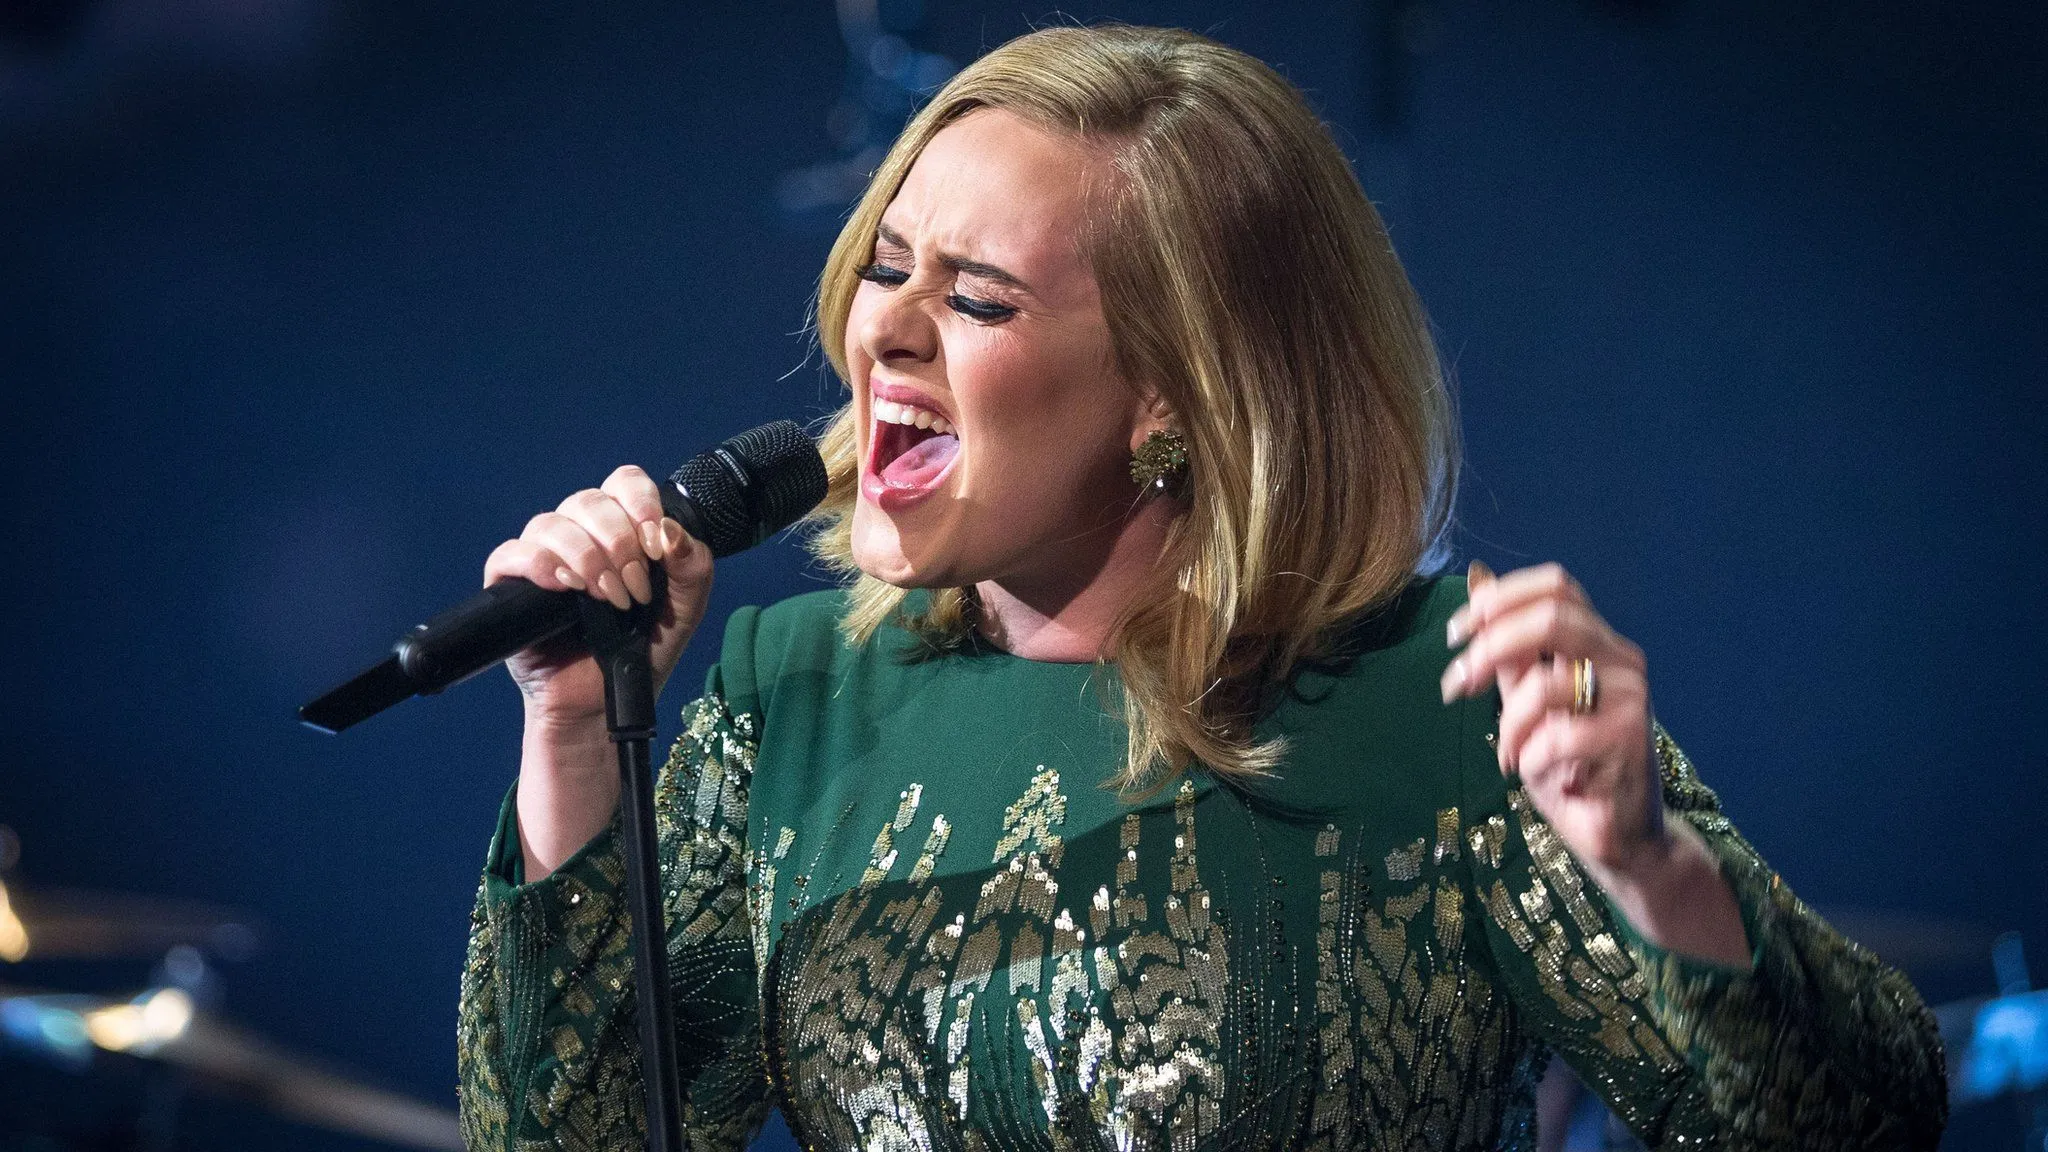 What Happened in Adele's Recent Performance?